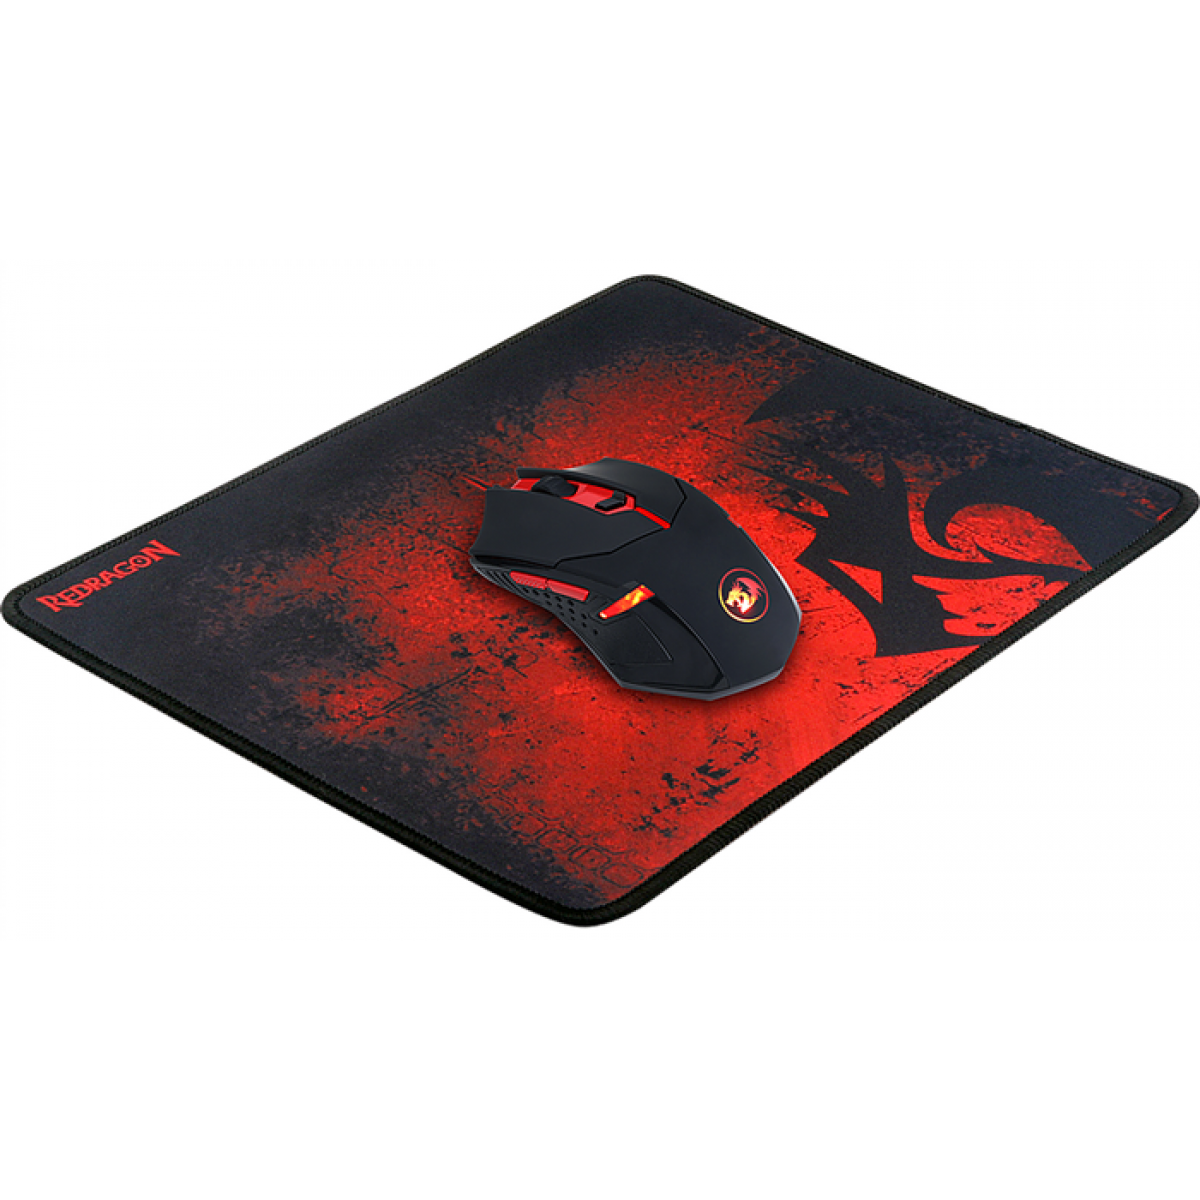 Combo Gamer Redragon Mouse Centrophorus M601 + Mouse Pad Gamer